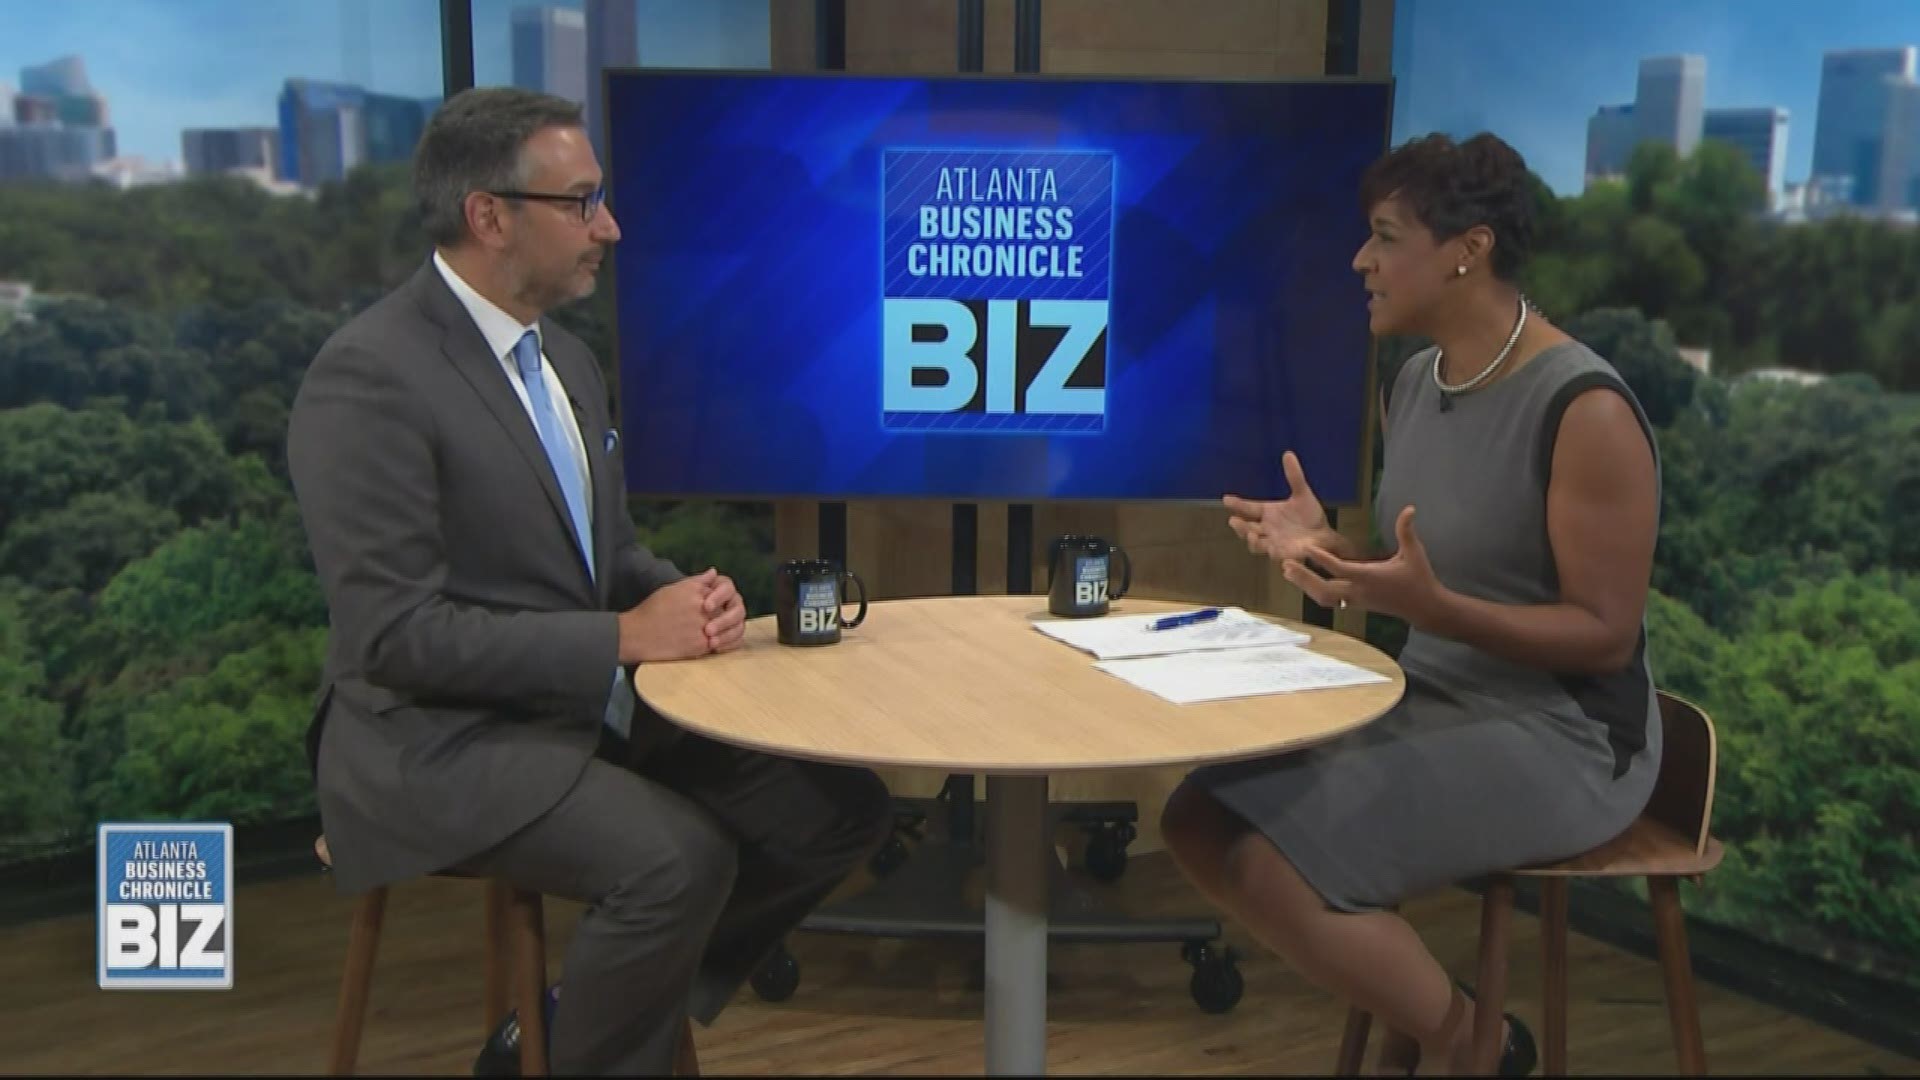 What kind of job perks would you want to see in the office during the summer? Andy Decker from Robert Half shares results from a recent survey on 'Atlanta Business Chronicle's BIZ'